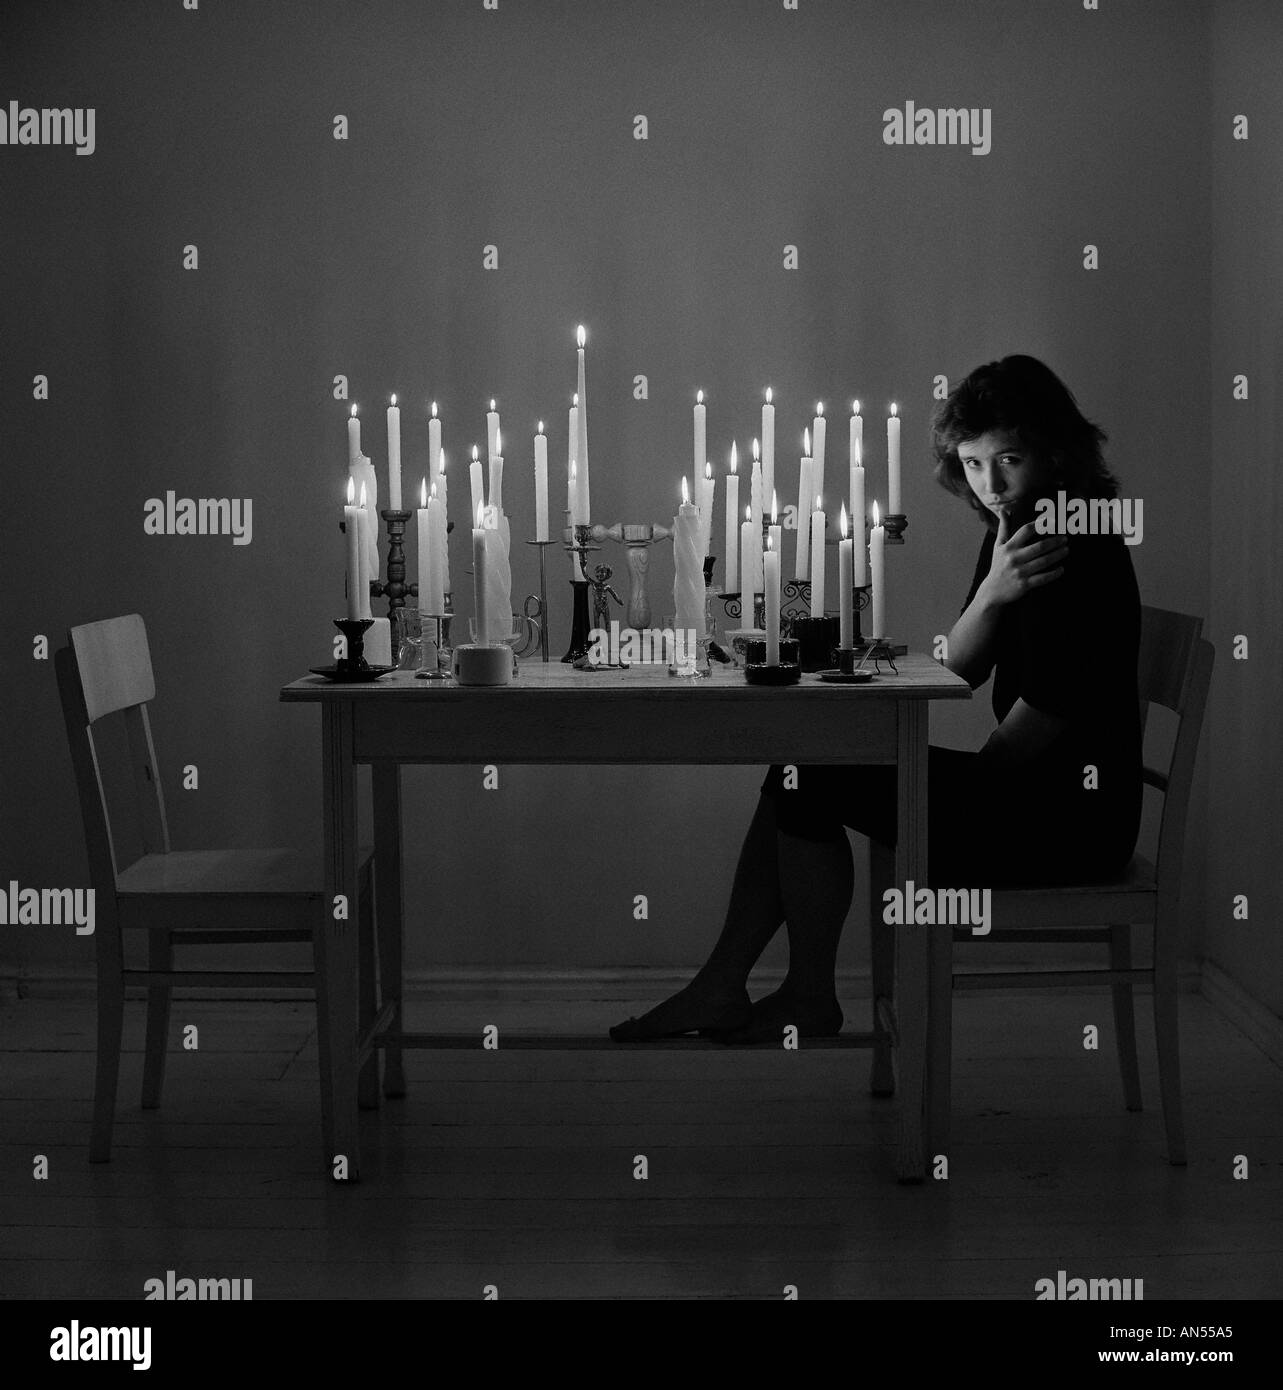 Sad woman sitting in empty room Several lit candles on table. 18, 19, 20, 20s, 20-24. 25-29, 30s years old, Stock Photo